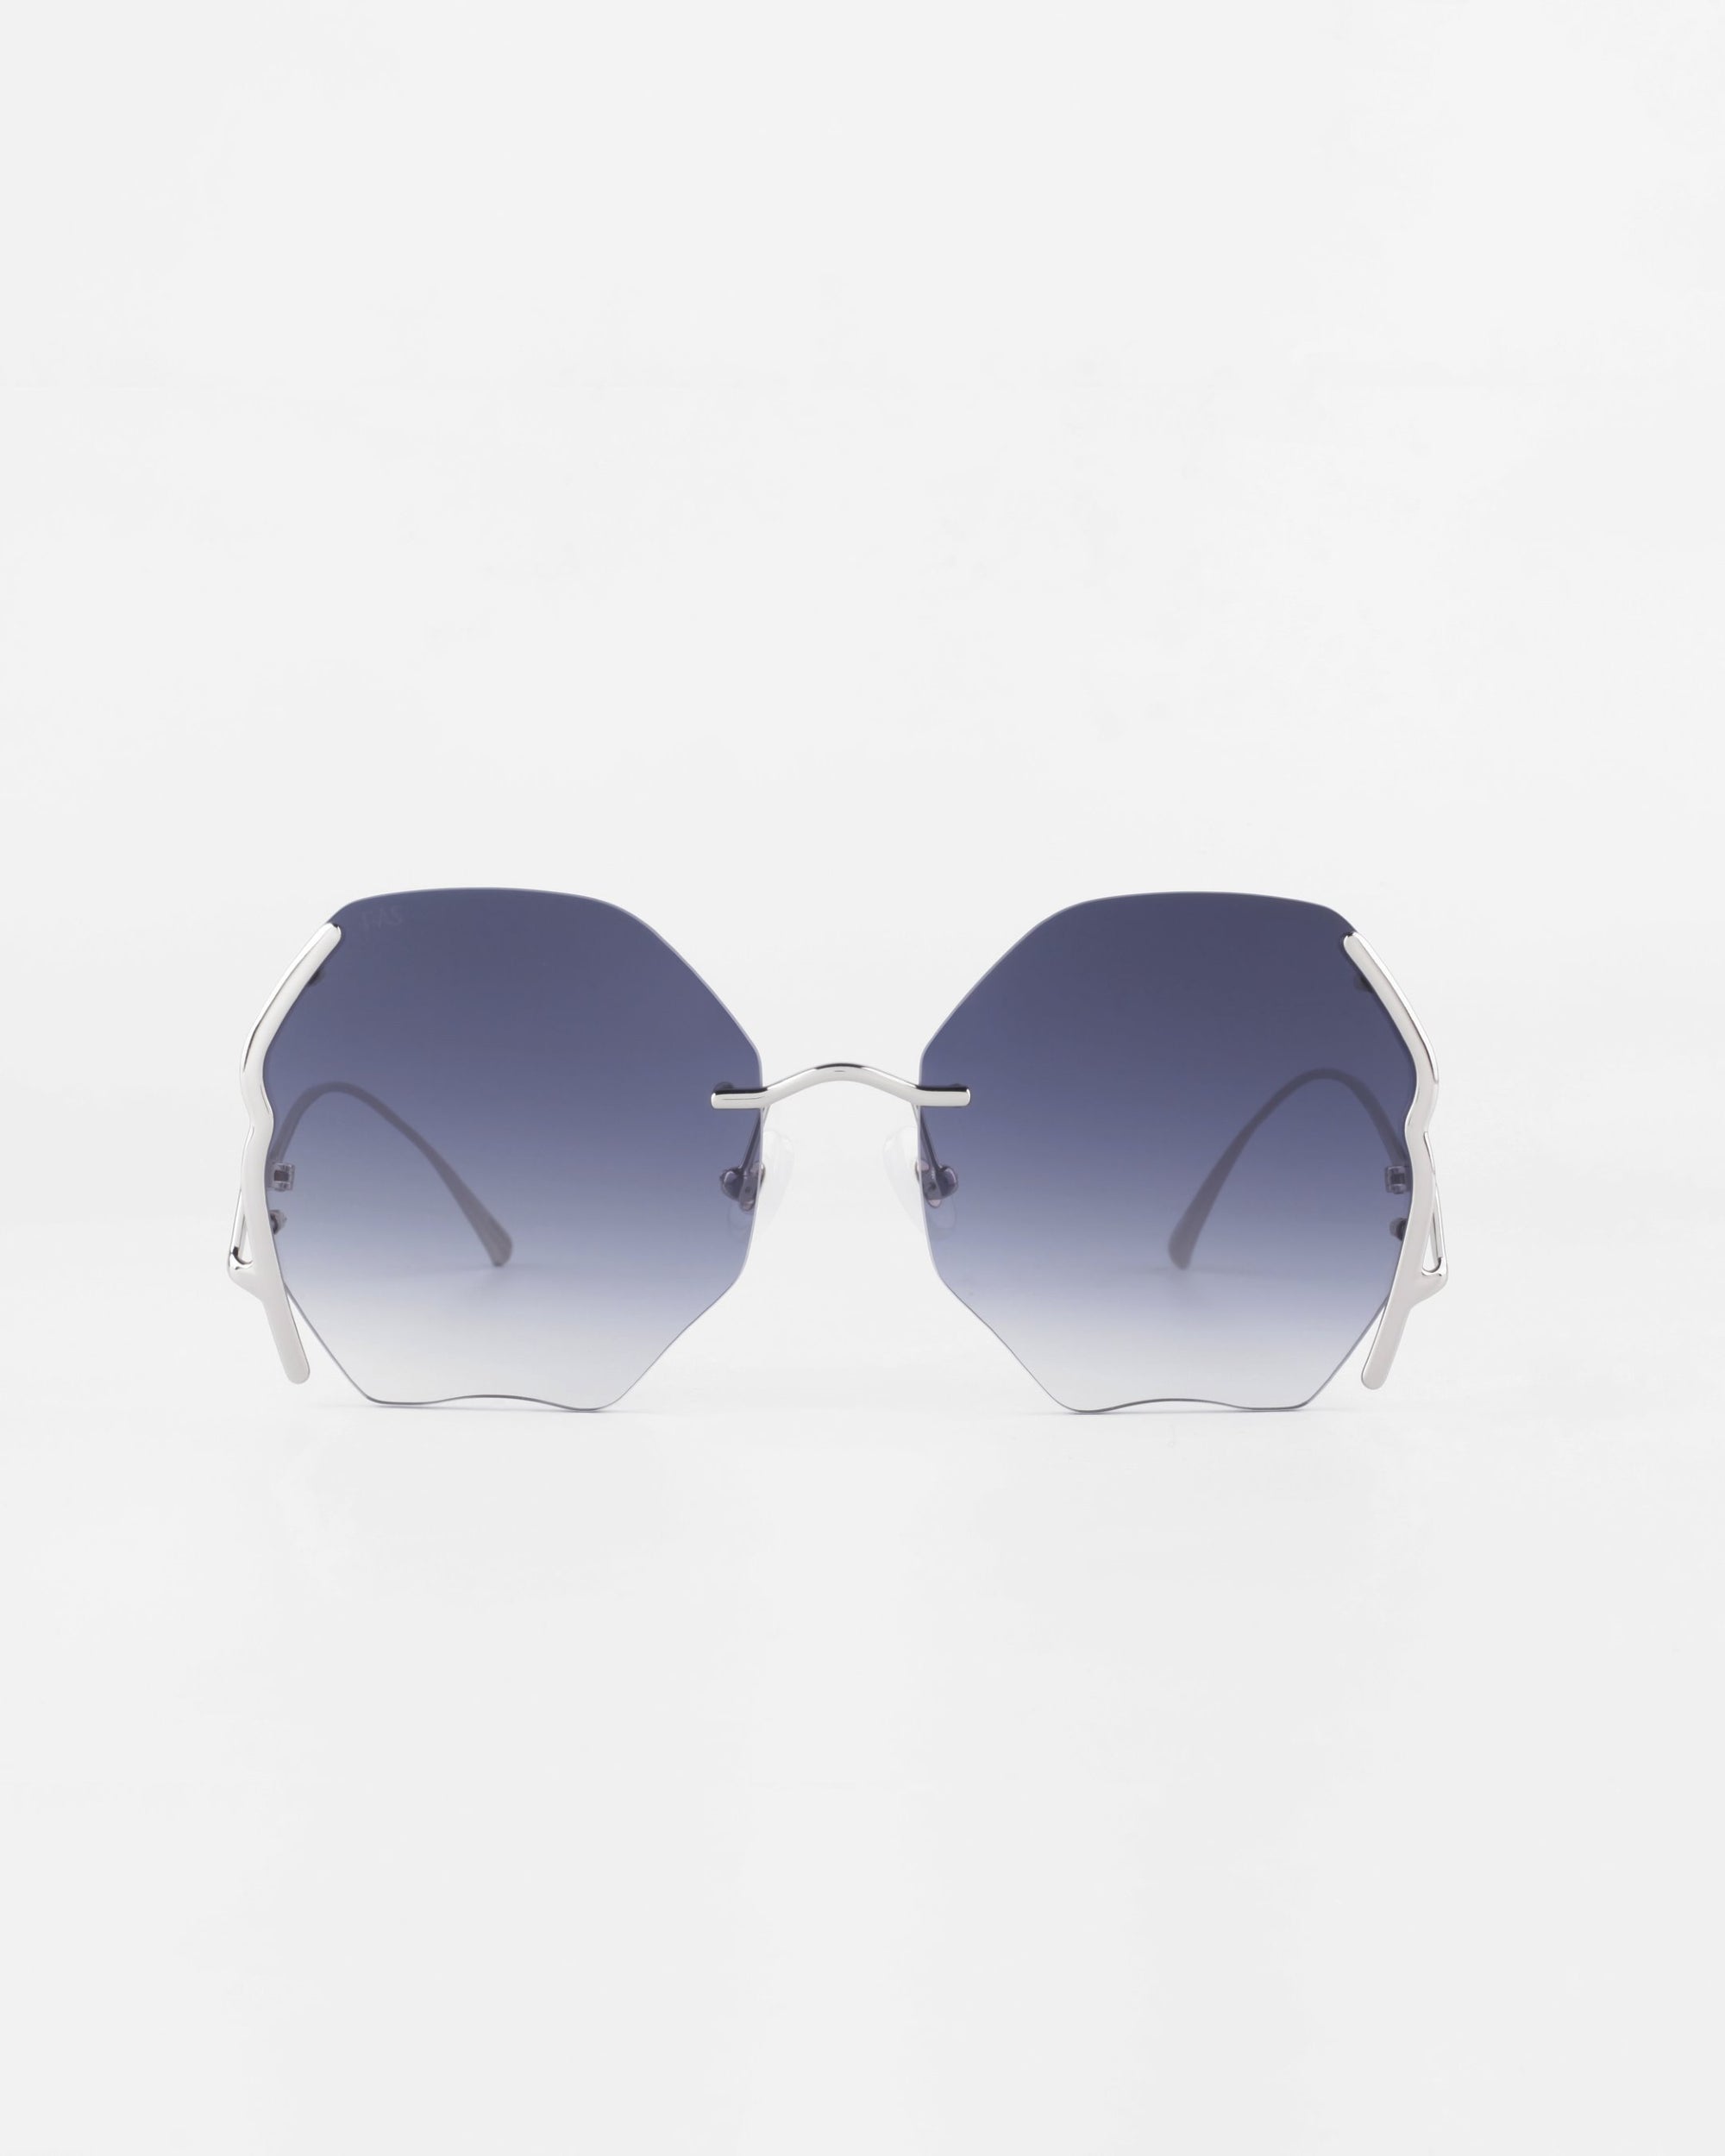 A pair of Century sunglasses from For Art&#39;s Sake® with gold-plated stainless steel thin frames. The ultra-lightweight nylon lenses offer 100% UVA &amp; UVB protection and have a gradient from dark blue at the top to clear at the bottom. The Century sunglasses are displayed against a plain white background.